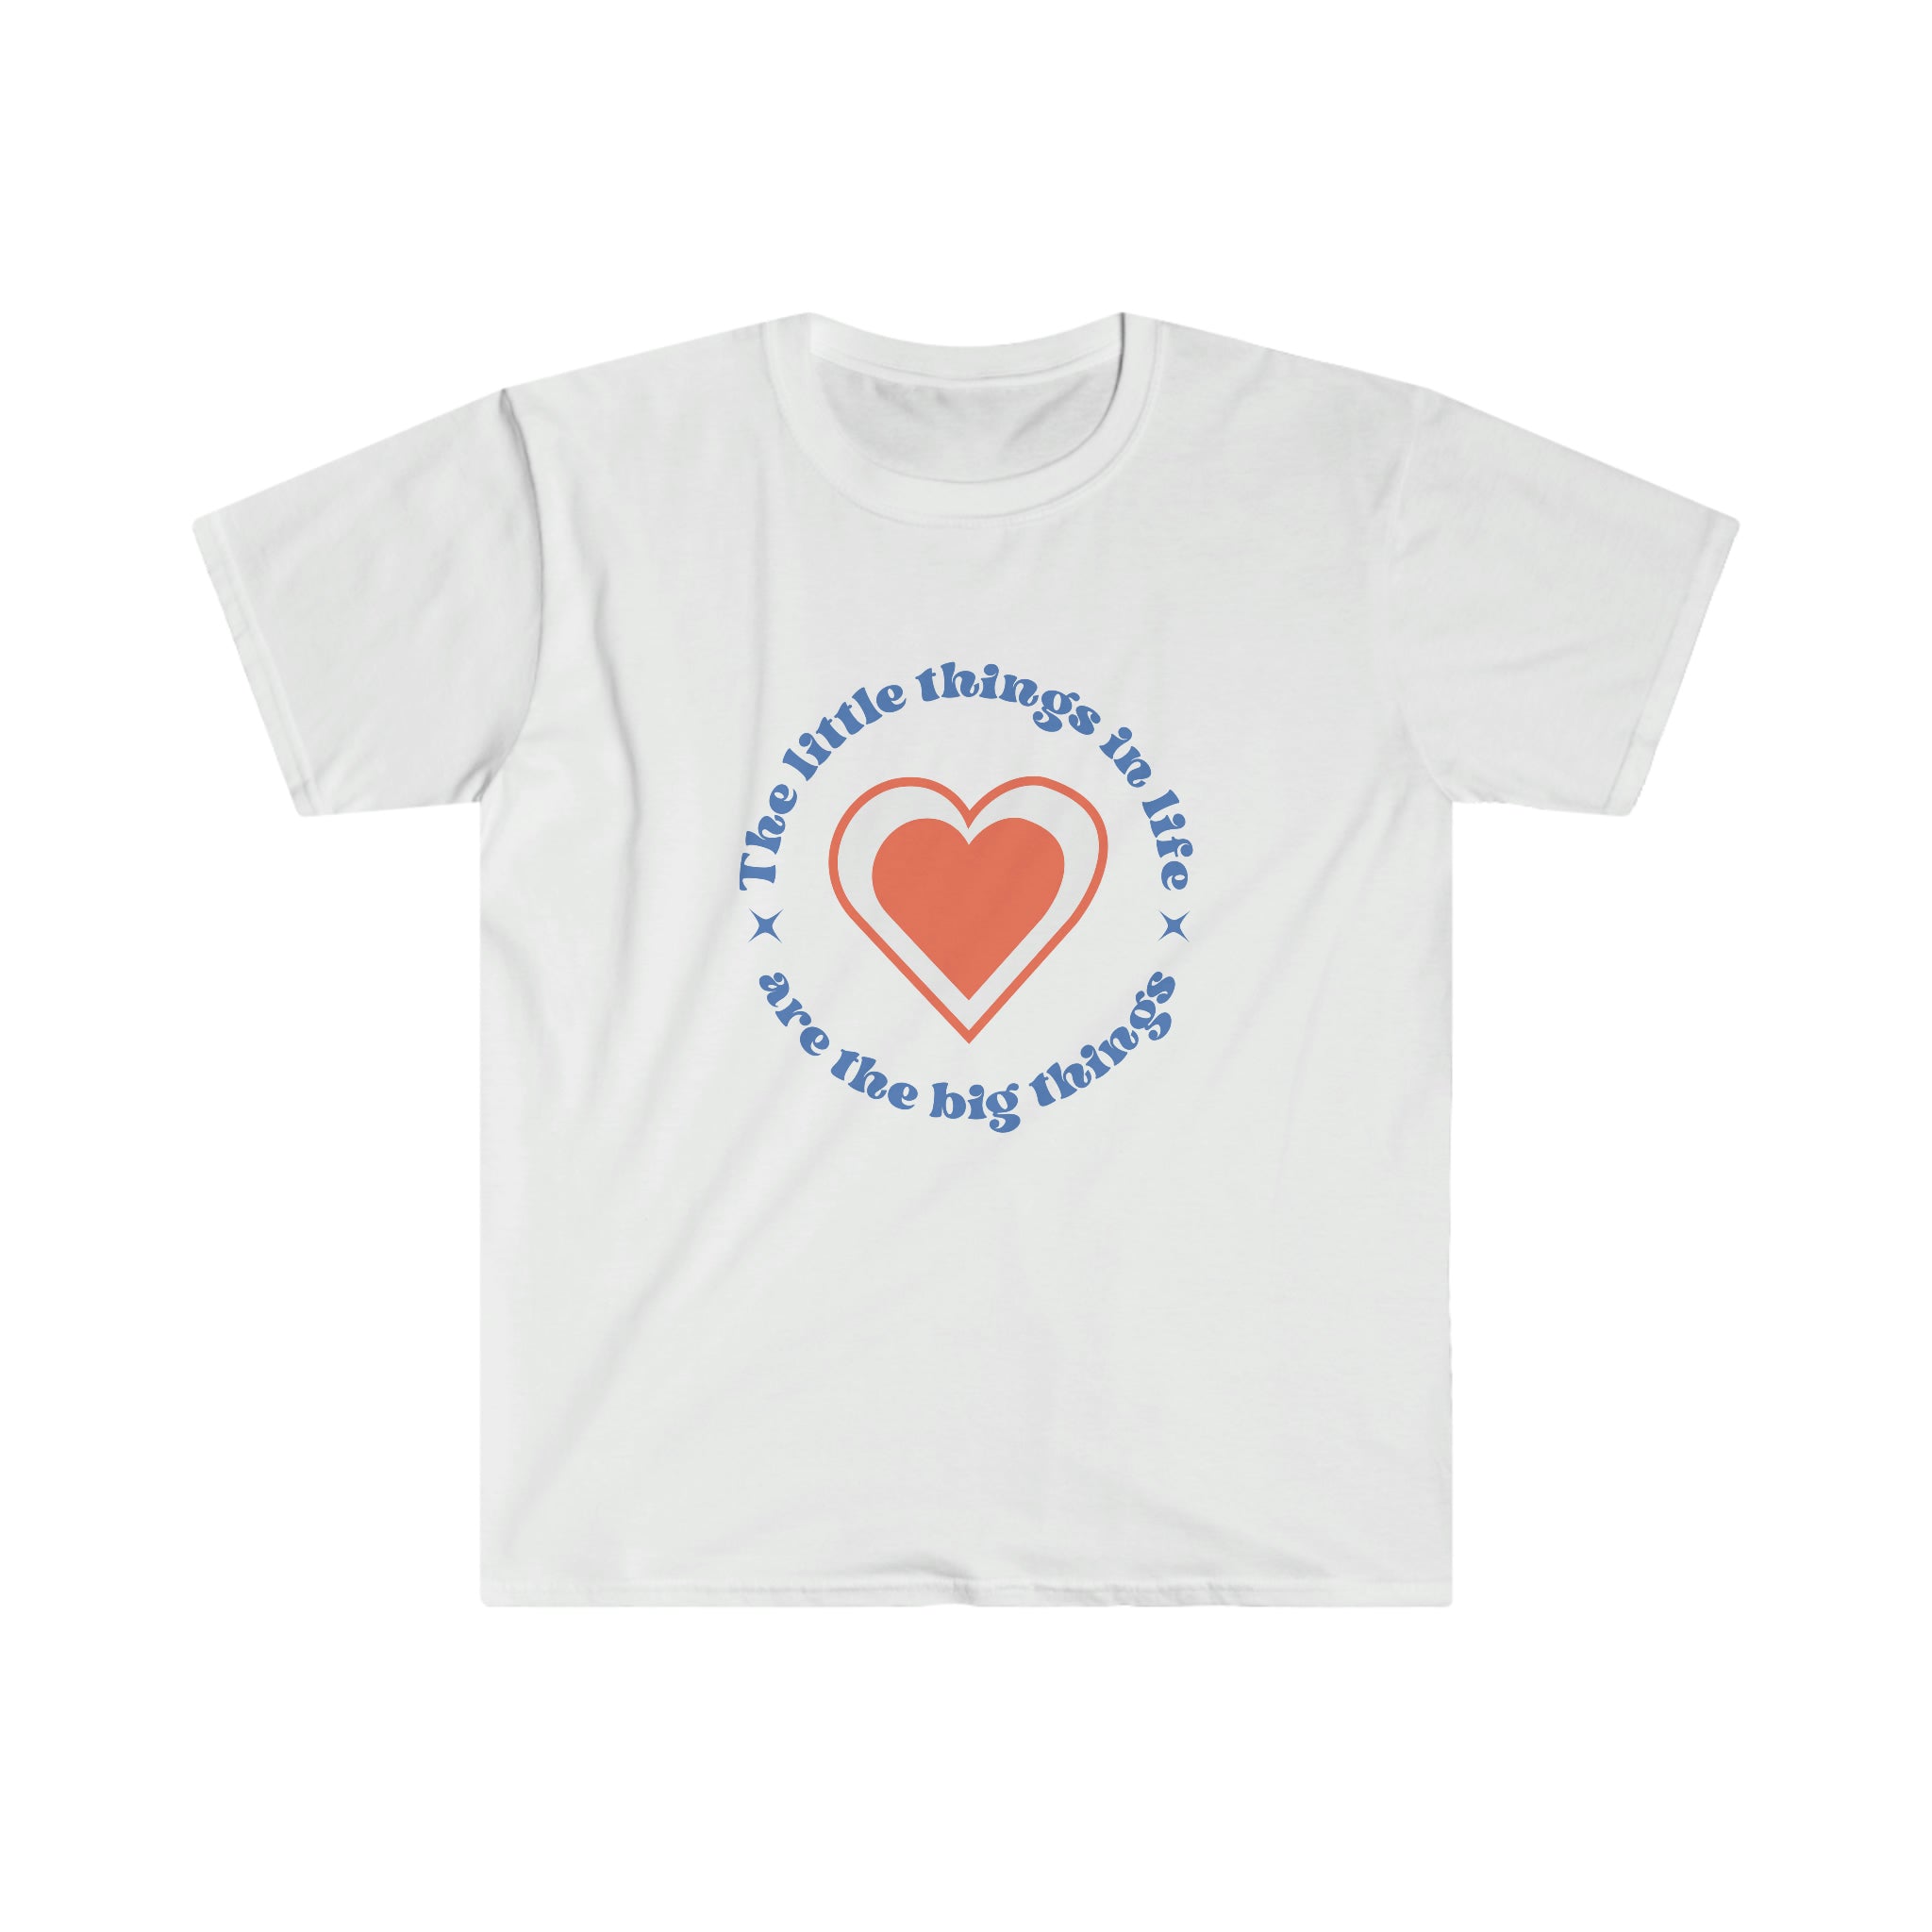 A "The Little Thing in Life Are the Big Things" t-shirt with an orange heart and a blue heart.